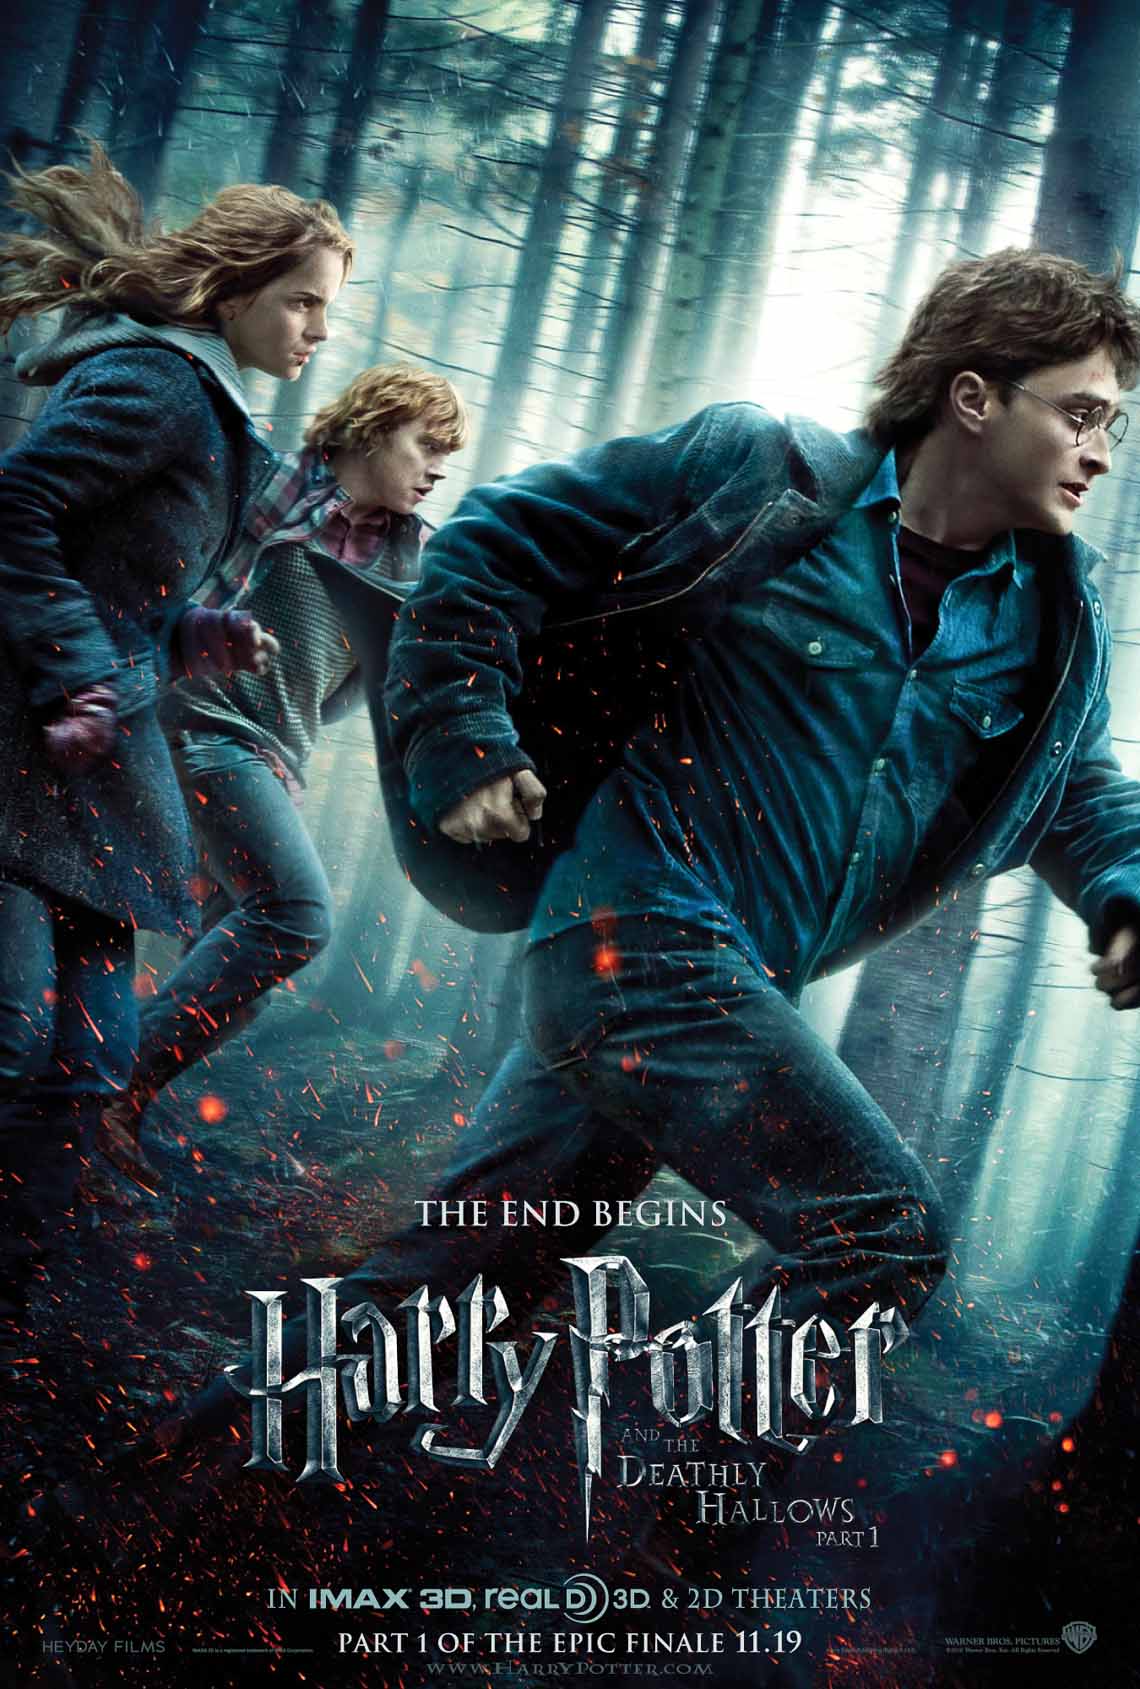 HARRY POTTER AND THE DEATHLY HALLOWS: Part I